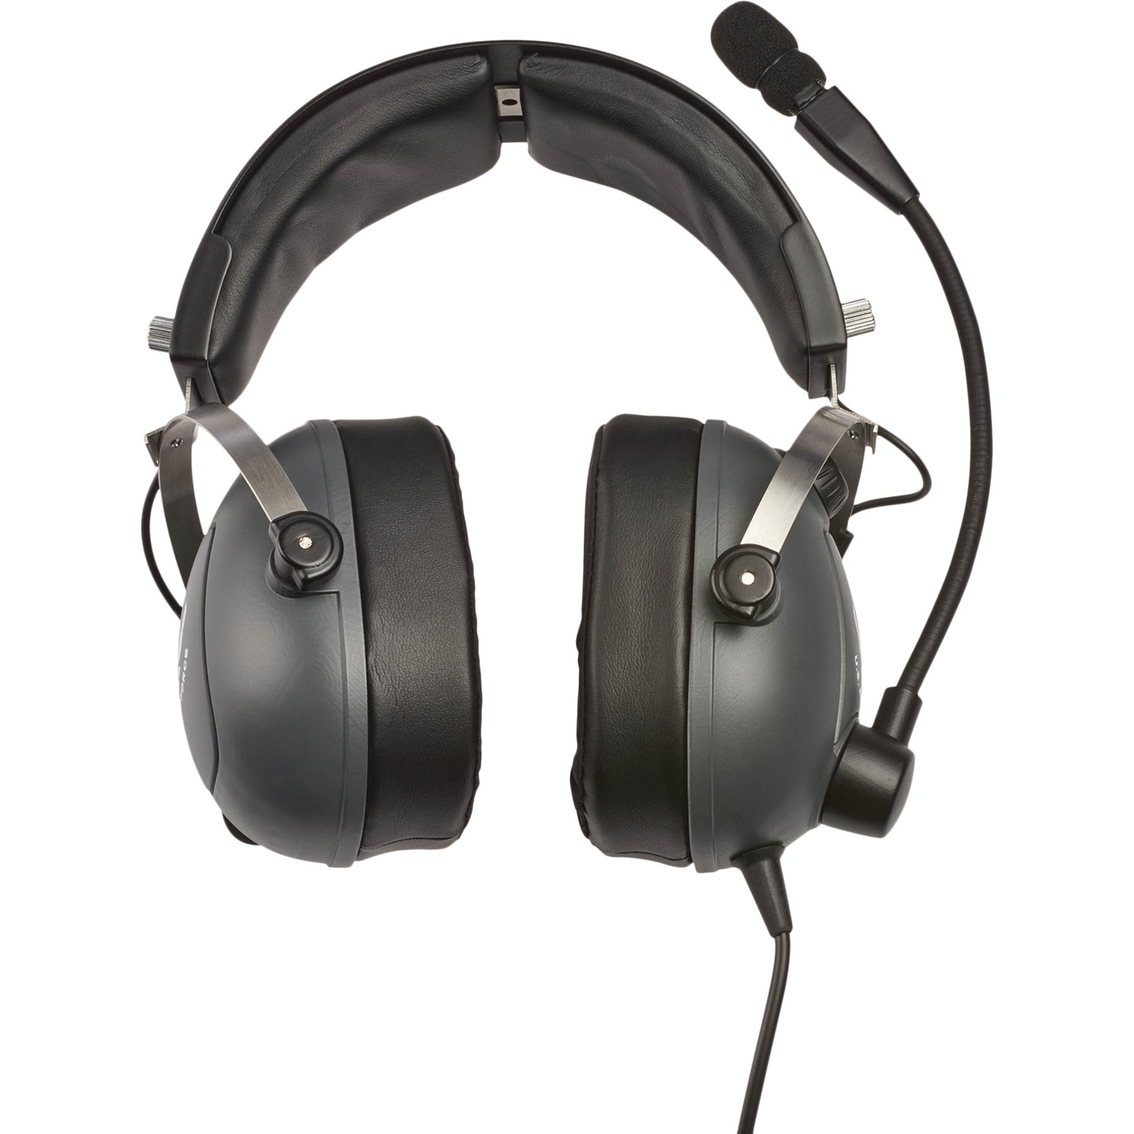 Thrustmaster T.Flight Gaming Headset (US Air Force Edition) - Image 5 of 10